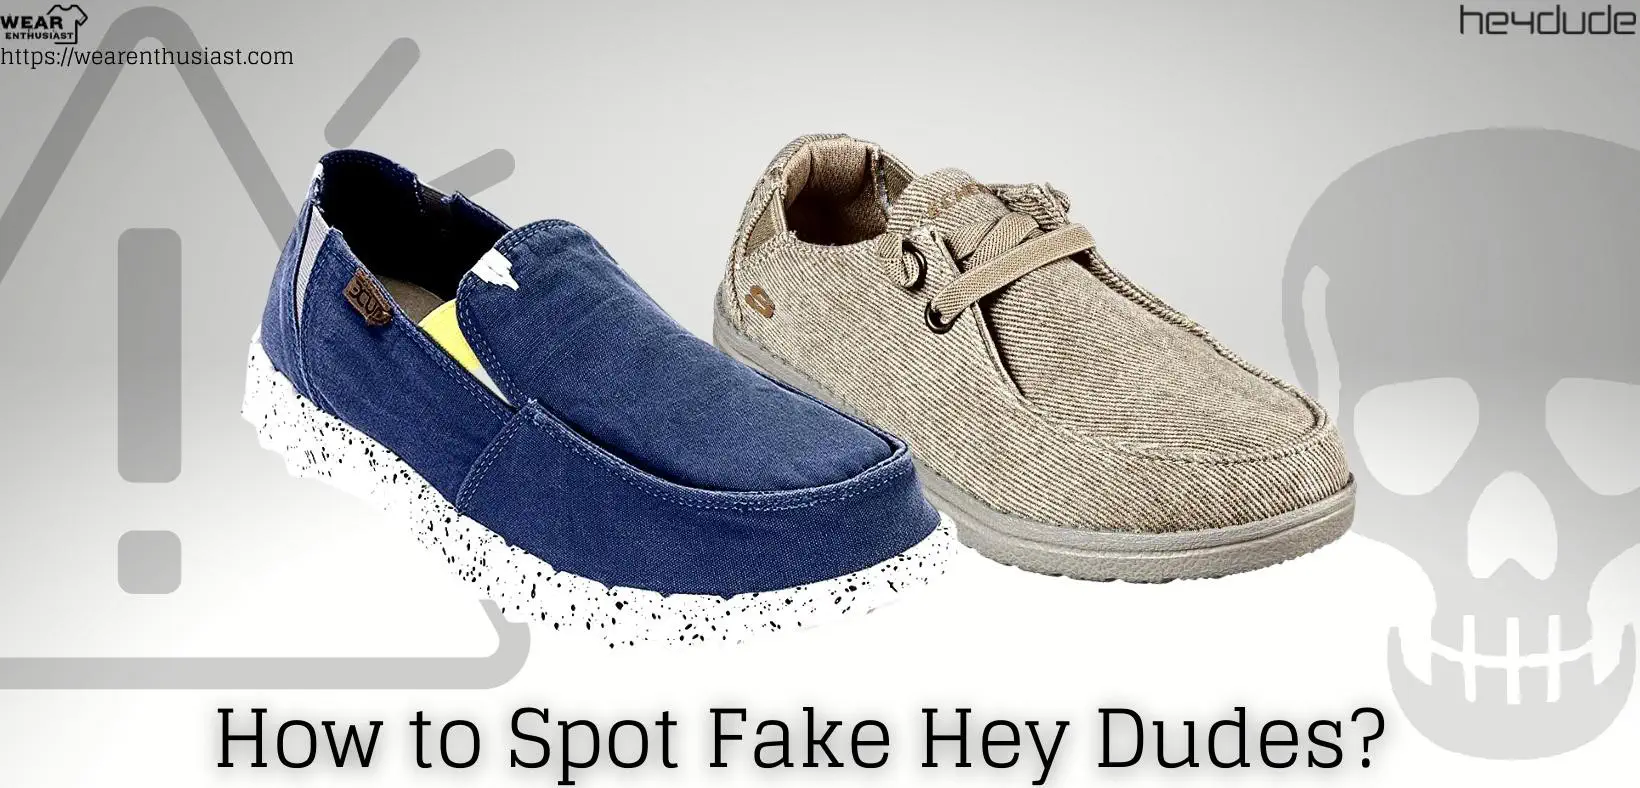 How to Spot Fake Hey Dudes?